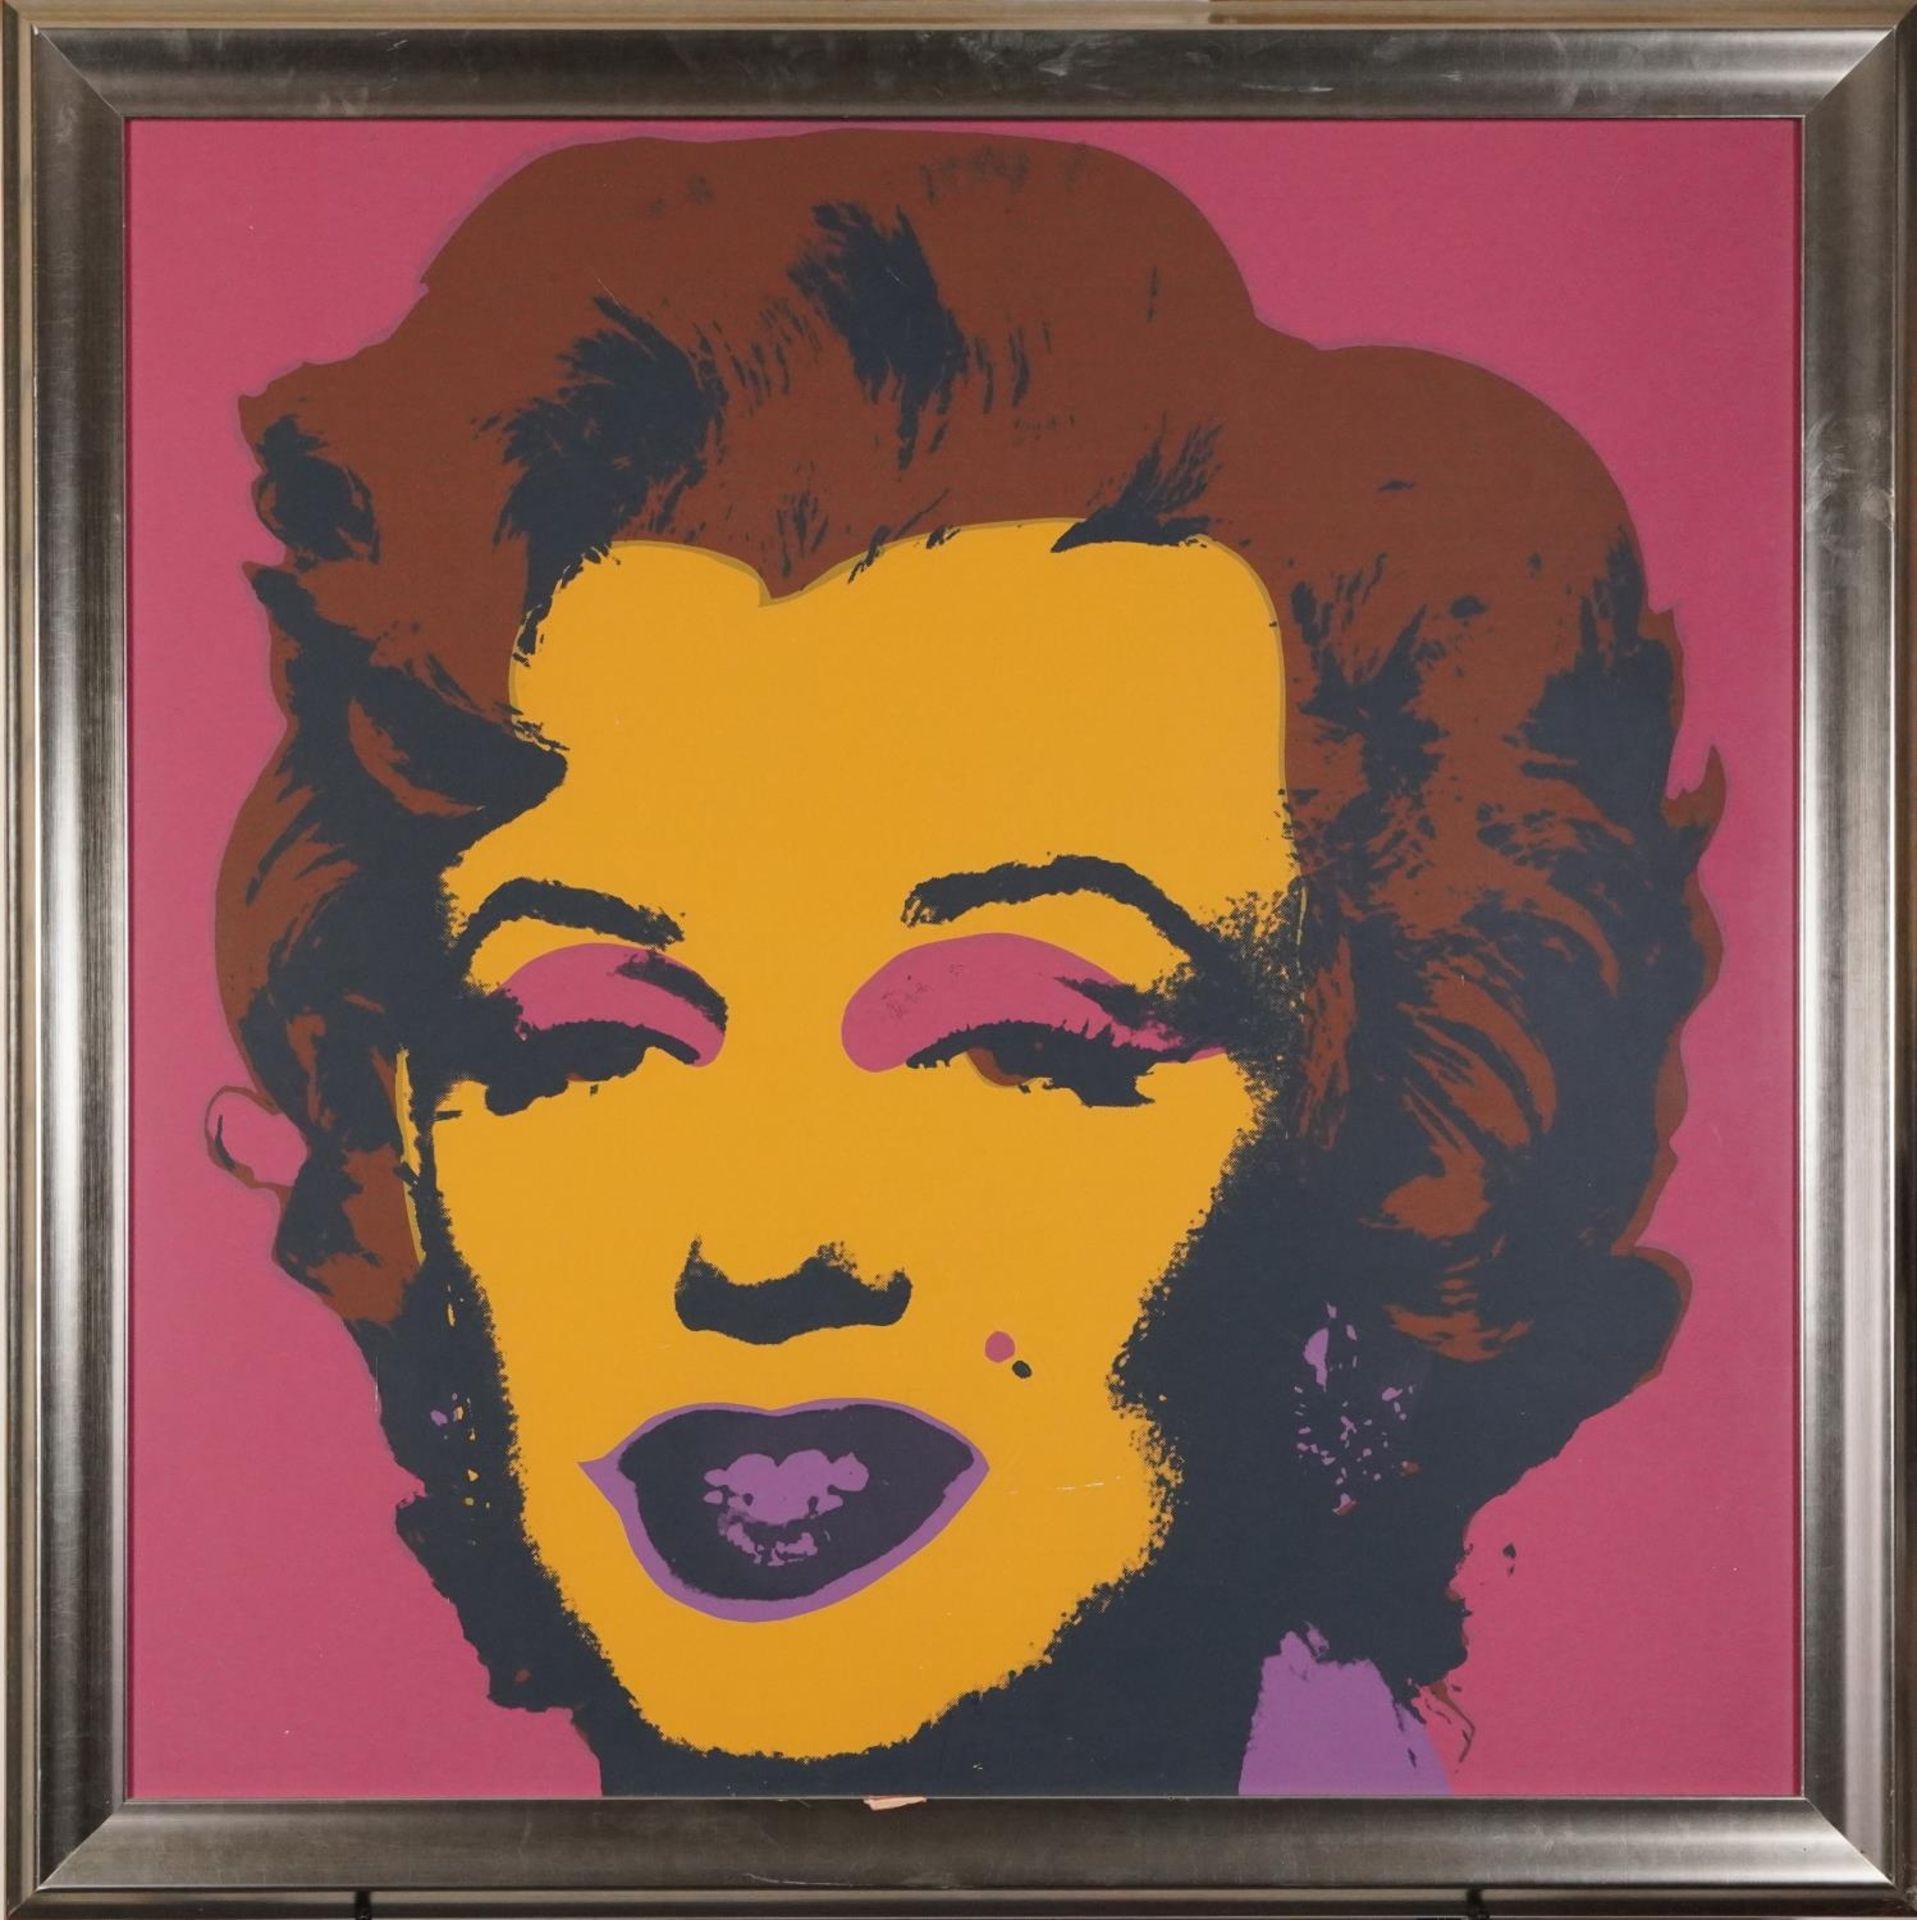 After Andy Warhol - Marilyn Monroe, Pop Art print in colour, framed and glazed, 89cm x 89cm - Image 2 of 3